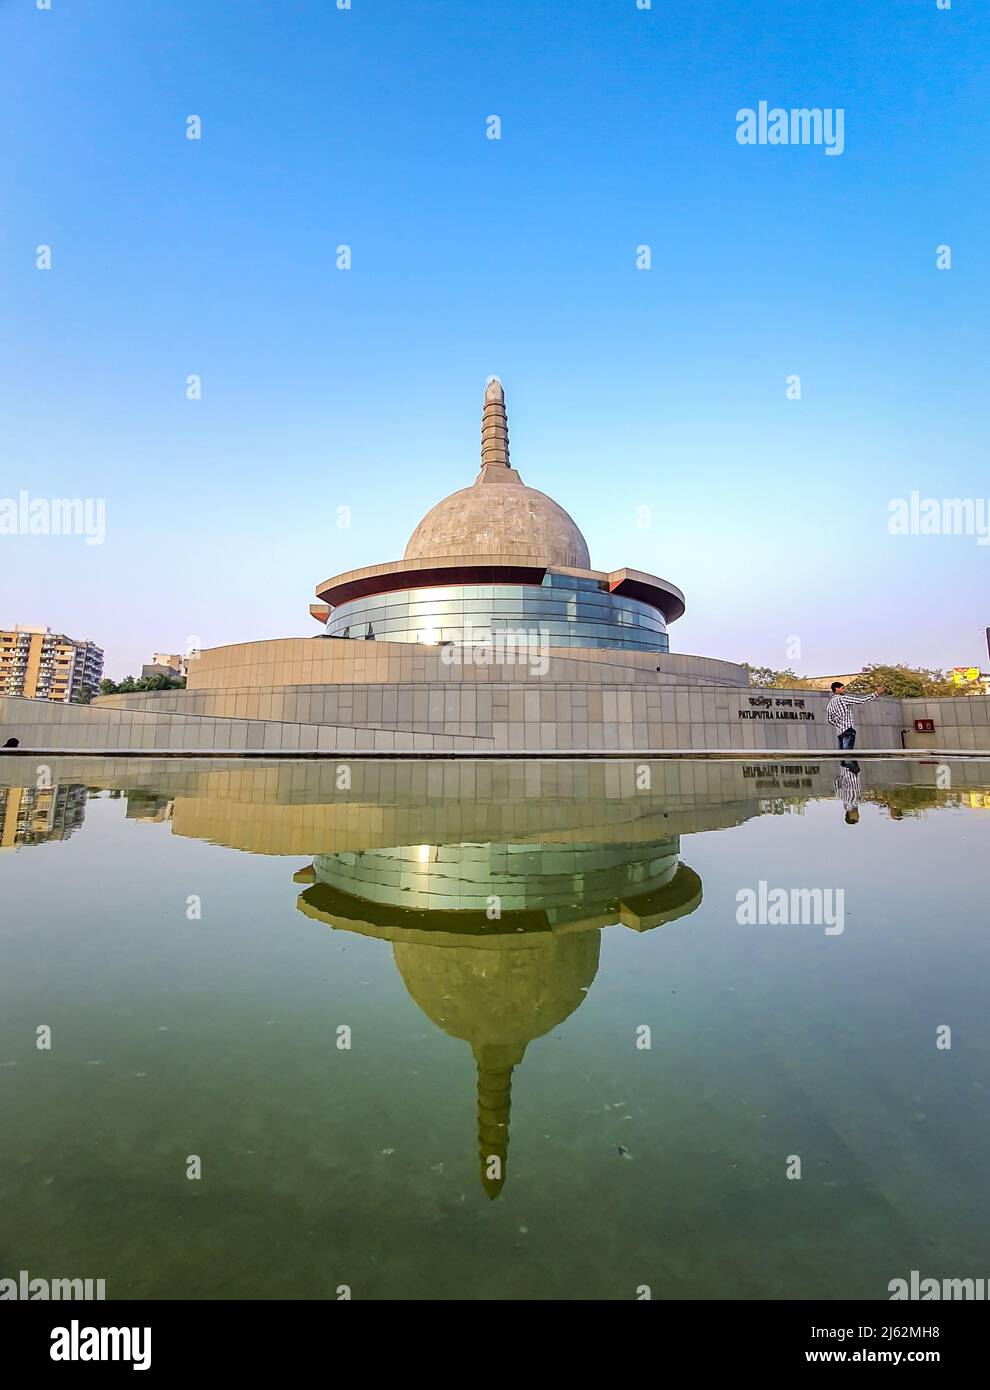 buddha stupa with water reflection and bright blue sky at morning image is taken at buddha park patna bihar india on Apr 15 2022. Stock Photo